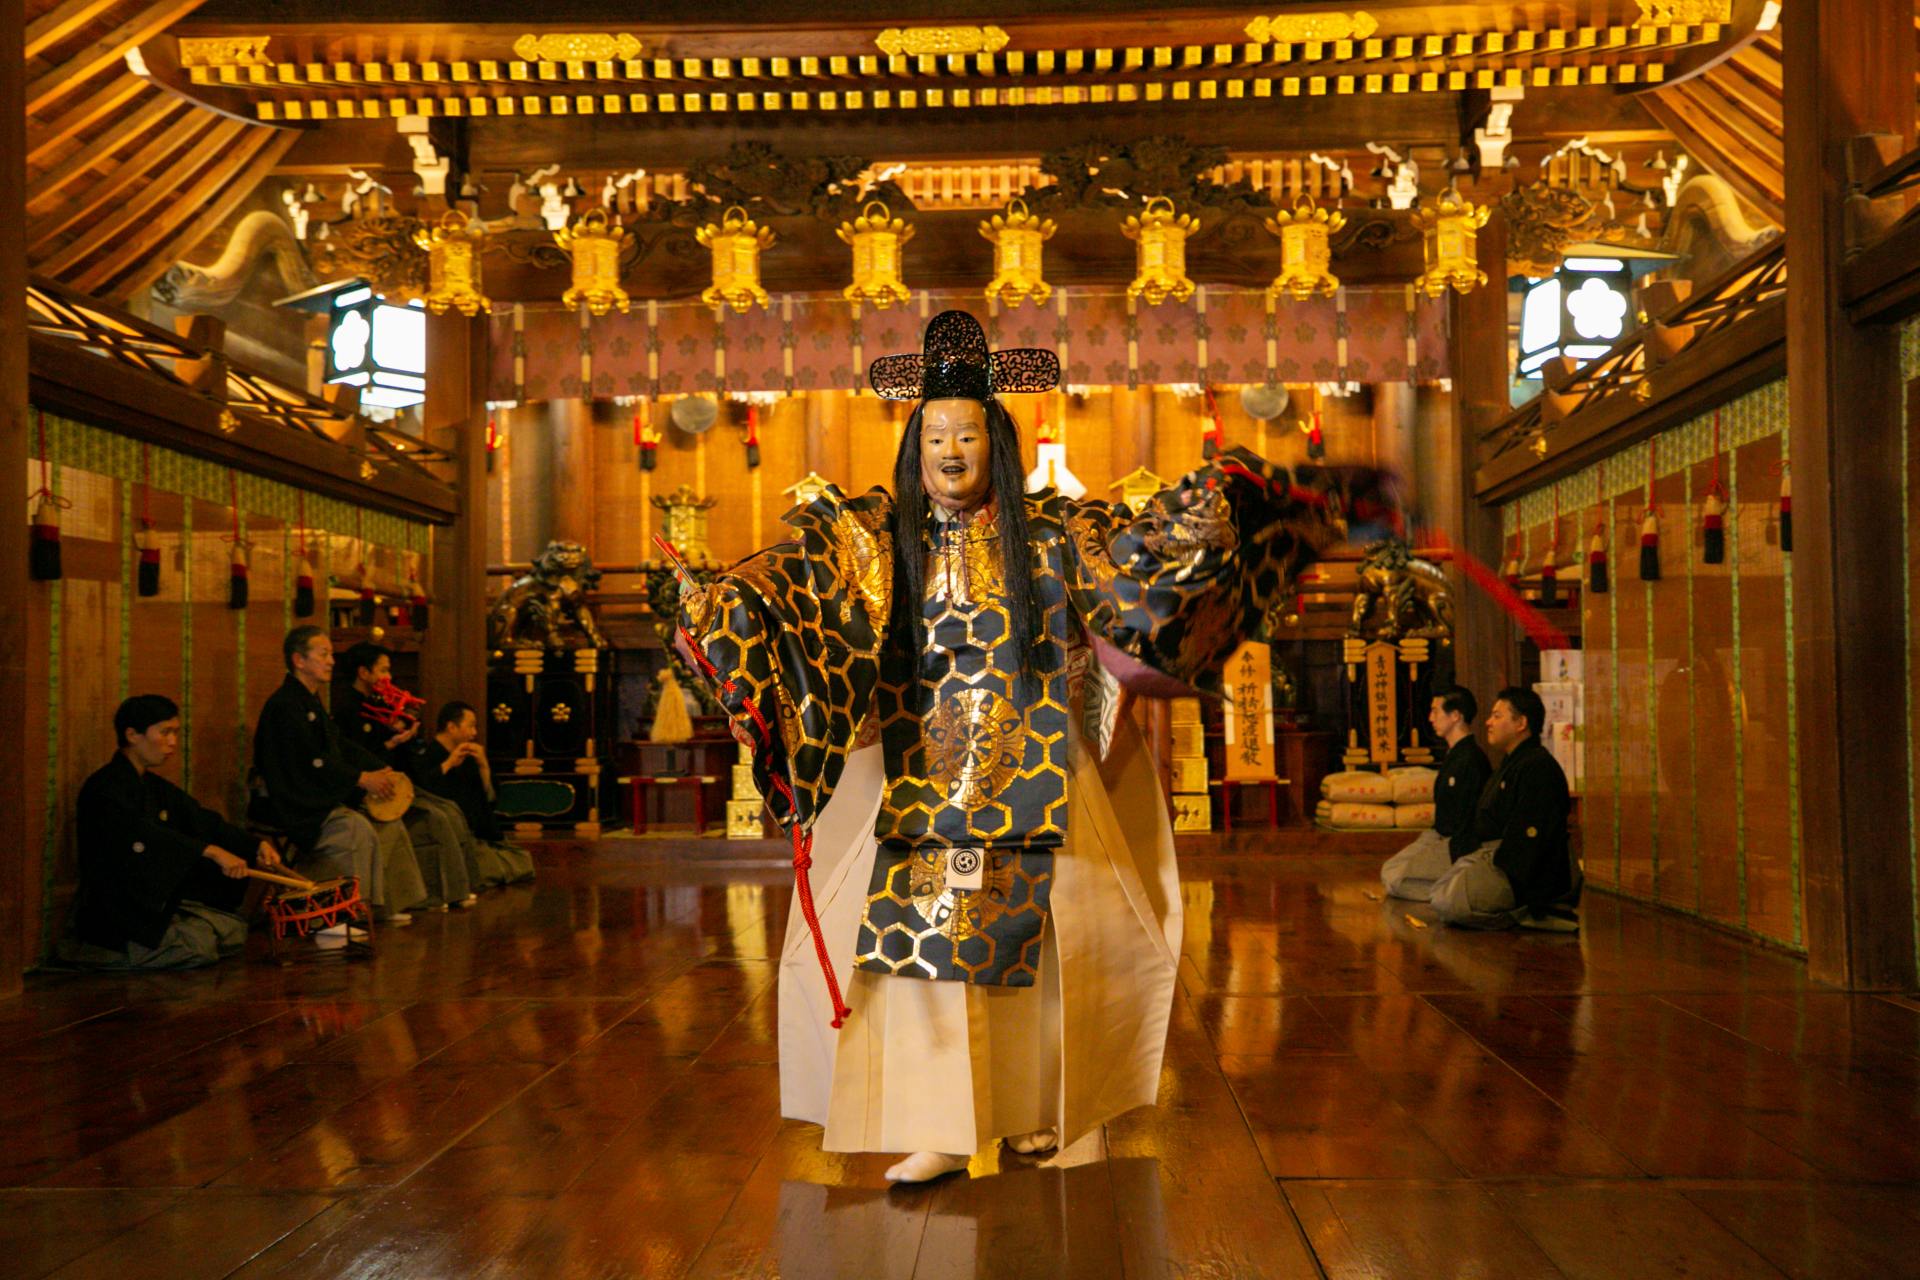 The performance is led by members of the Ueno family, one of the most important names in Noh theater.